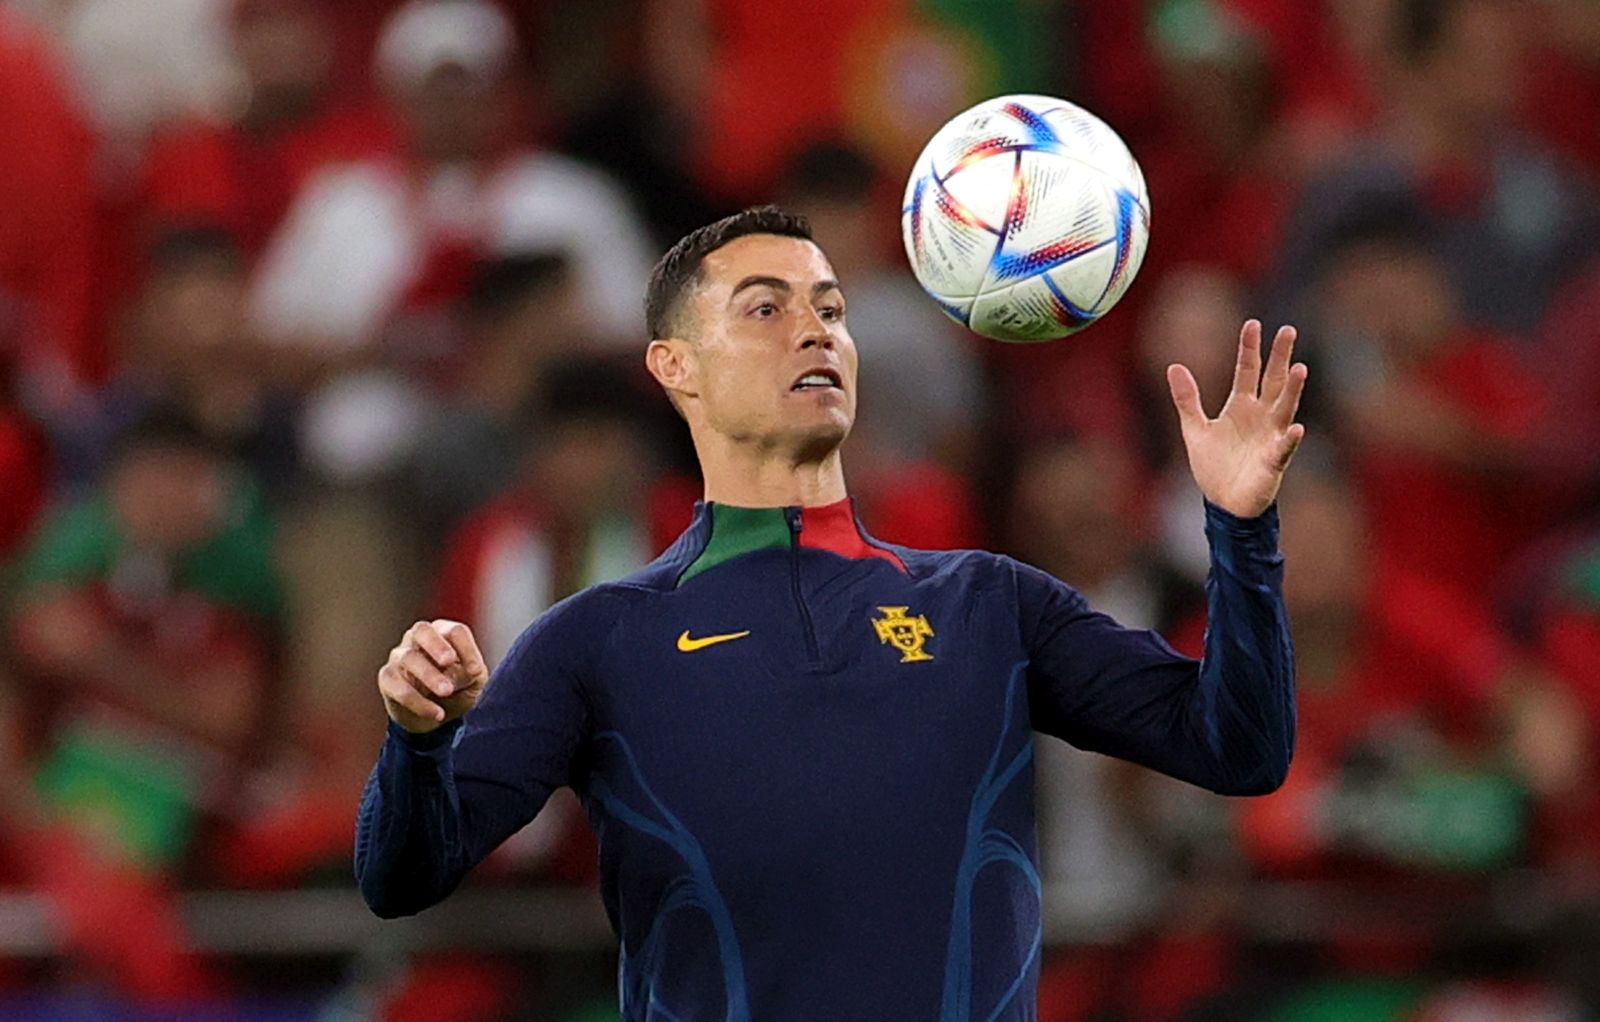 epa10359051 Cristiano Ronaldo of Portugal during warm up prior to the FIFA World Cup 2022 quarter final soccer match between Morocco and Portugal at Al Thumama Stadium in Doha, Qatar, 10 December 2022.  EPA/Friedemann Vogel